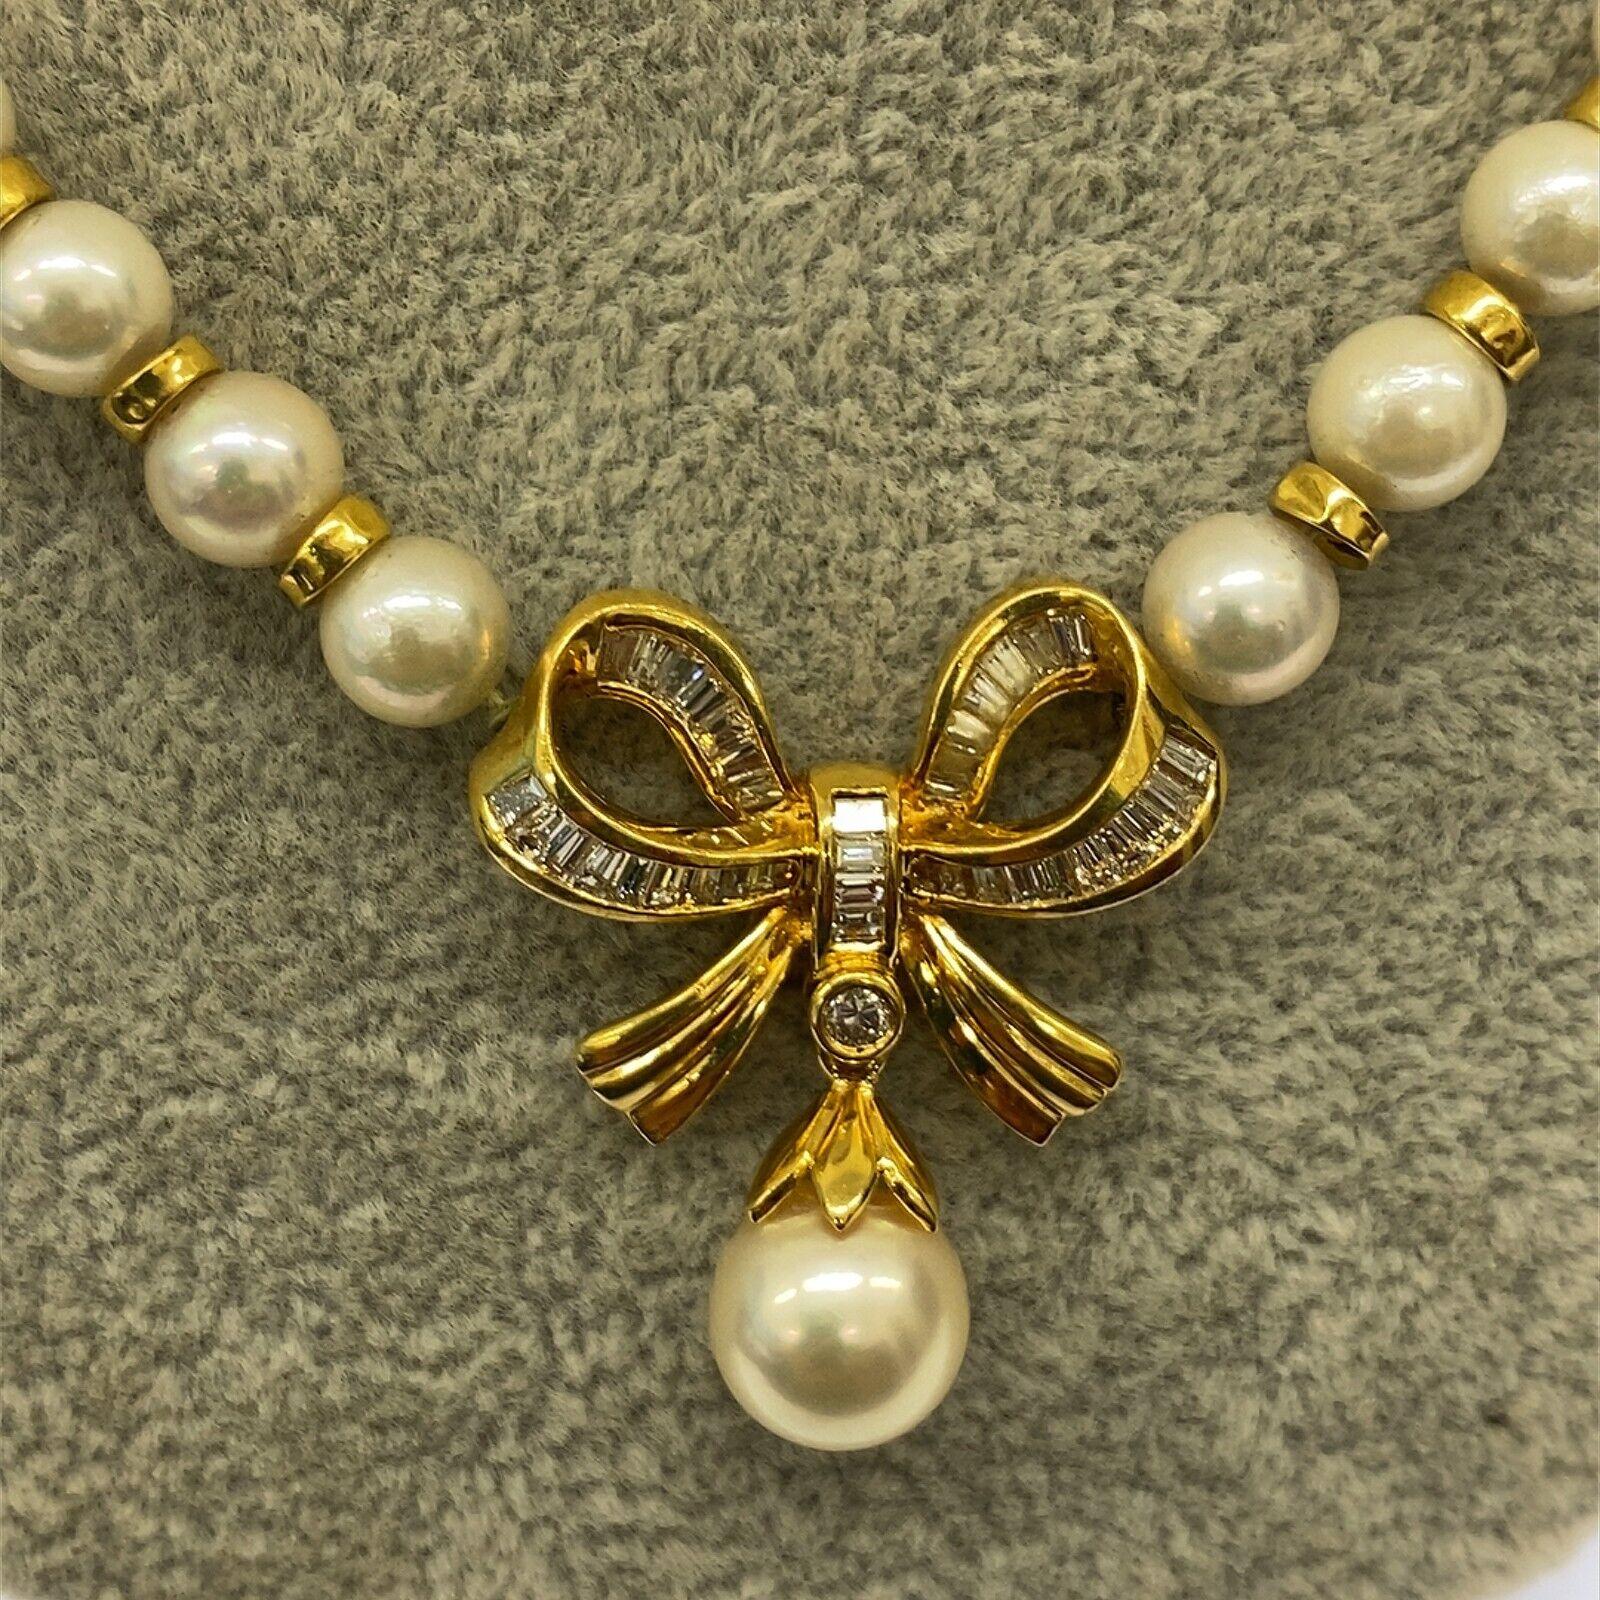 Beautiful Cultural 6-6.5mmPearl Necklace with 18ct Yellow Gold & Diamond Baguette Centre Piece With 8.8mm Pearl Drop set with 18ct Clasp

Additional Information: 
Total Diamond Weight: 1.02ct
Diamond Colour: F
Diamond Clarity: VS
Total Gold Weight: